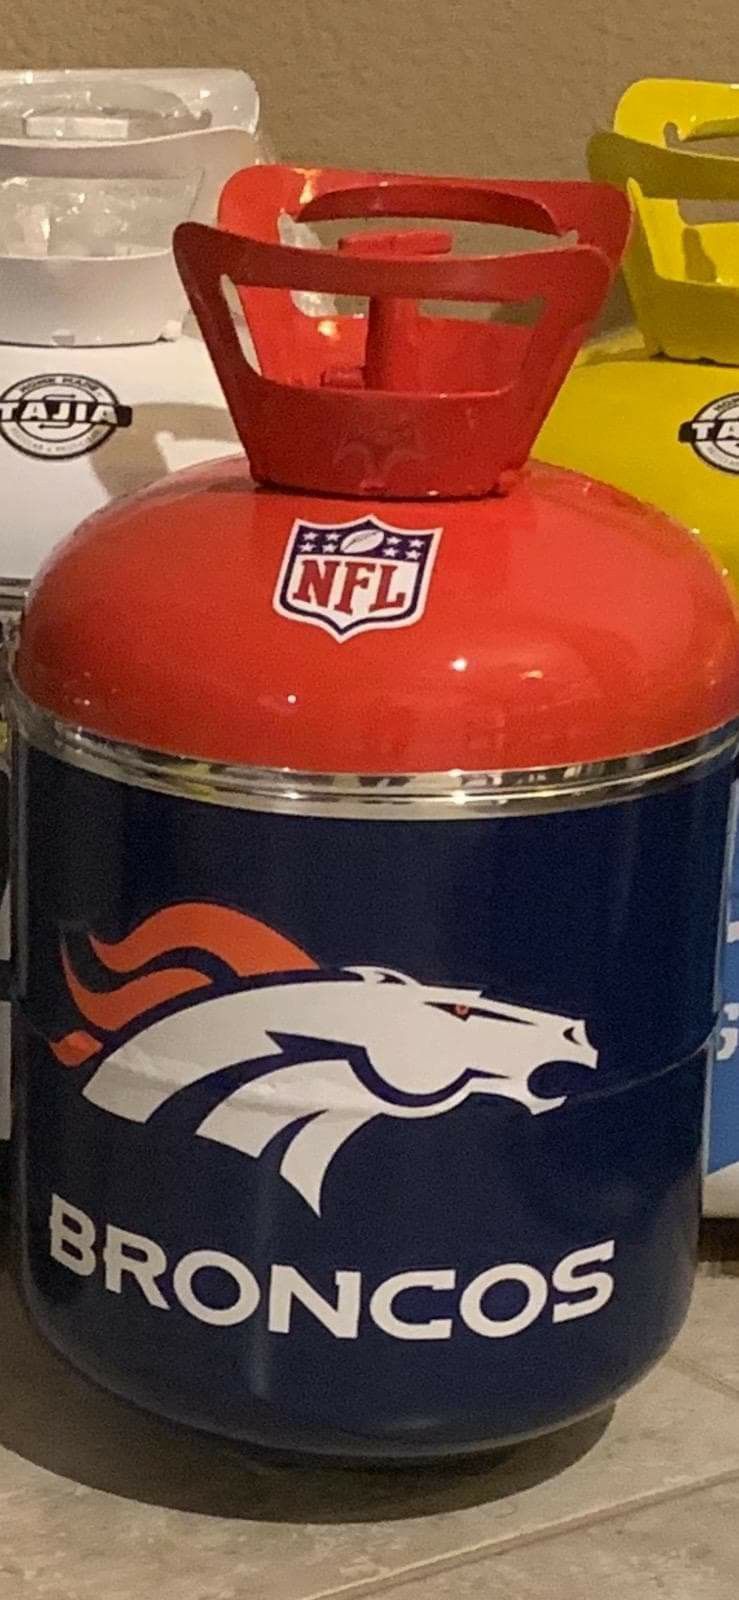 One of a kind cooler / ice chest Denver Broncos NFL made from freon tanks